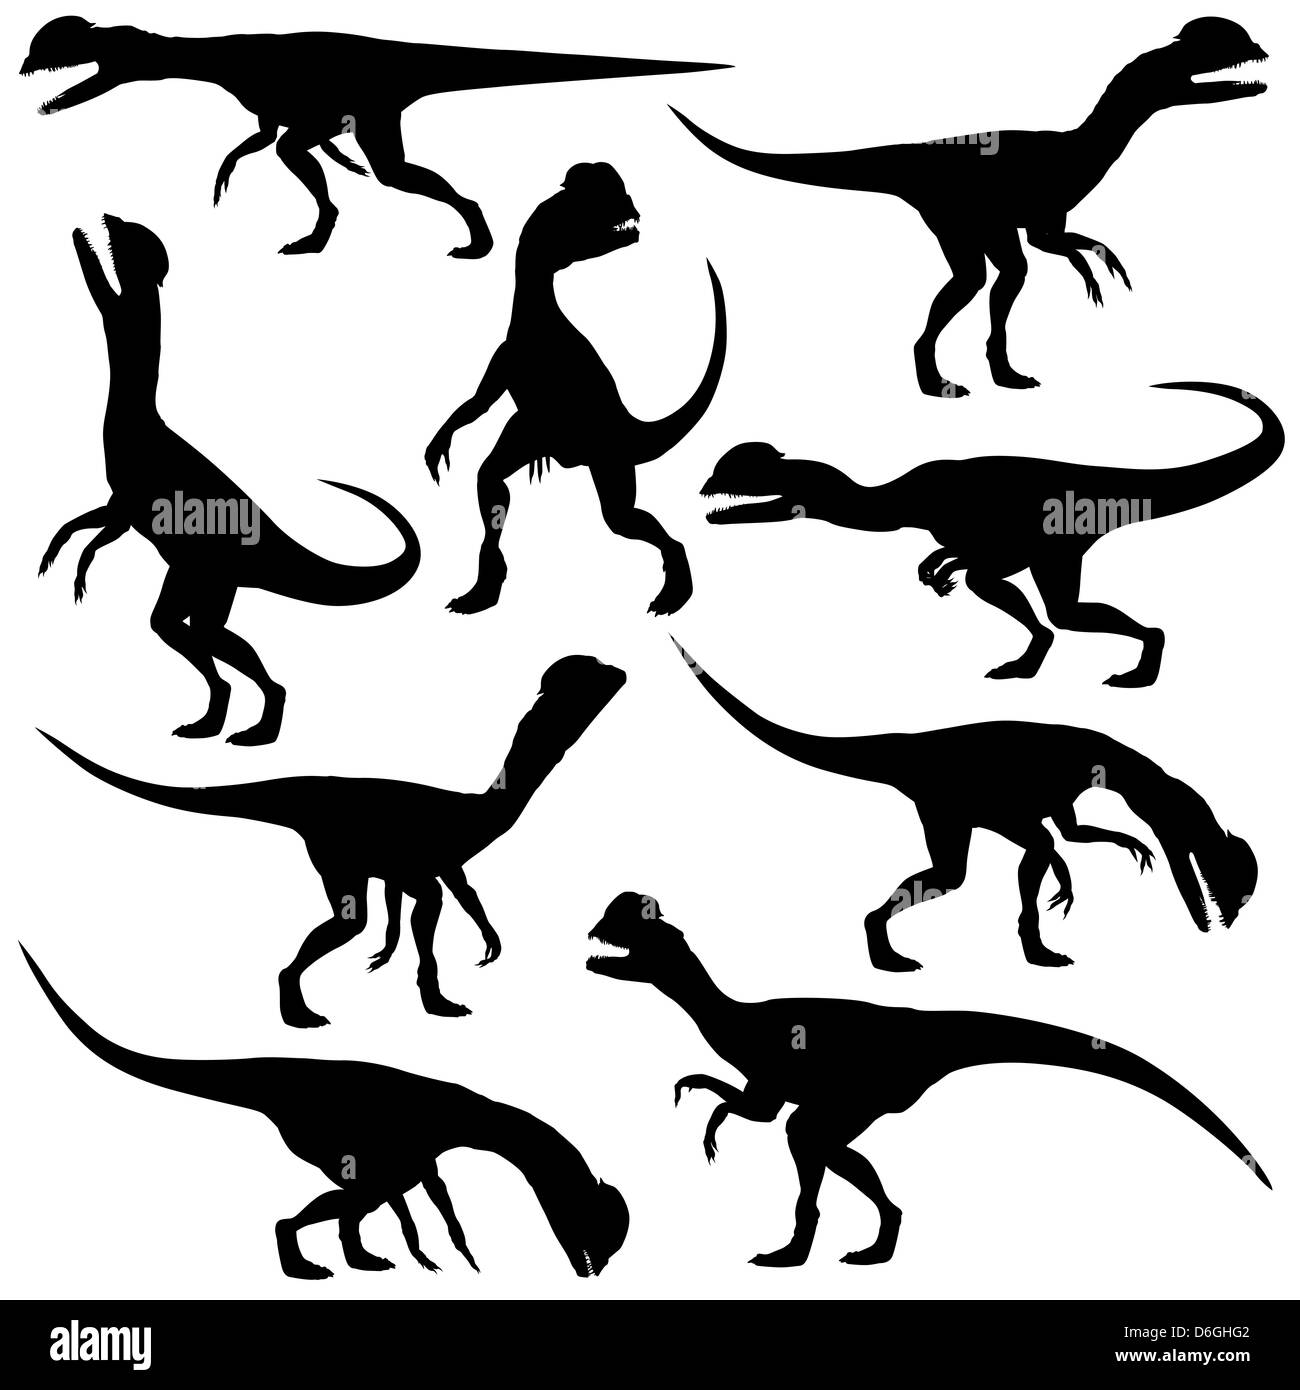 Set of illustrated silhouettes of Dilophosaurus dinosaurs in various poses Stock Photo